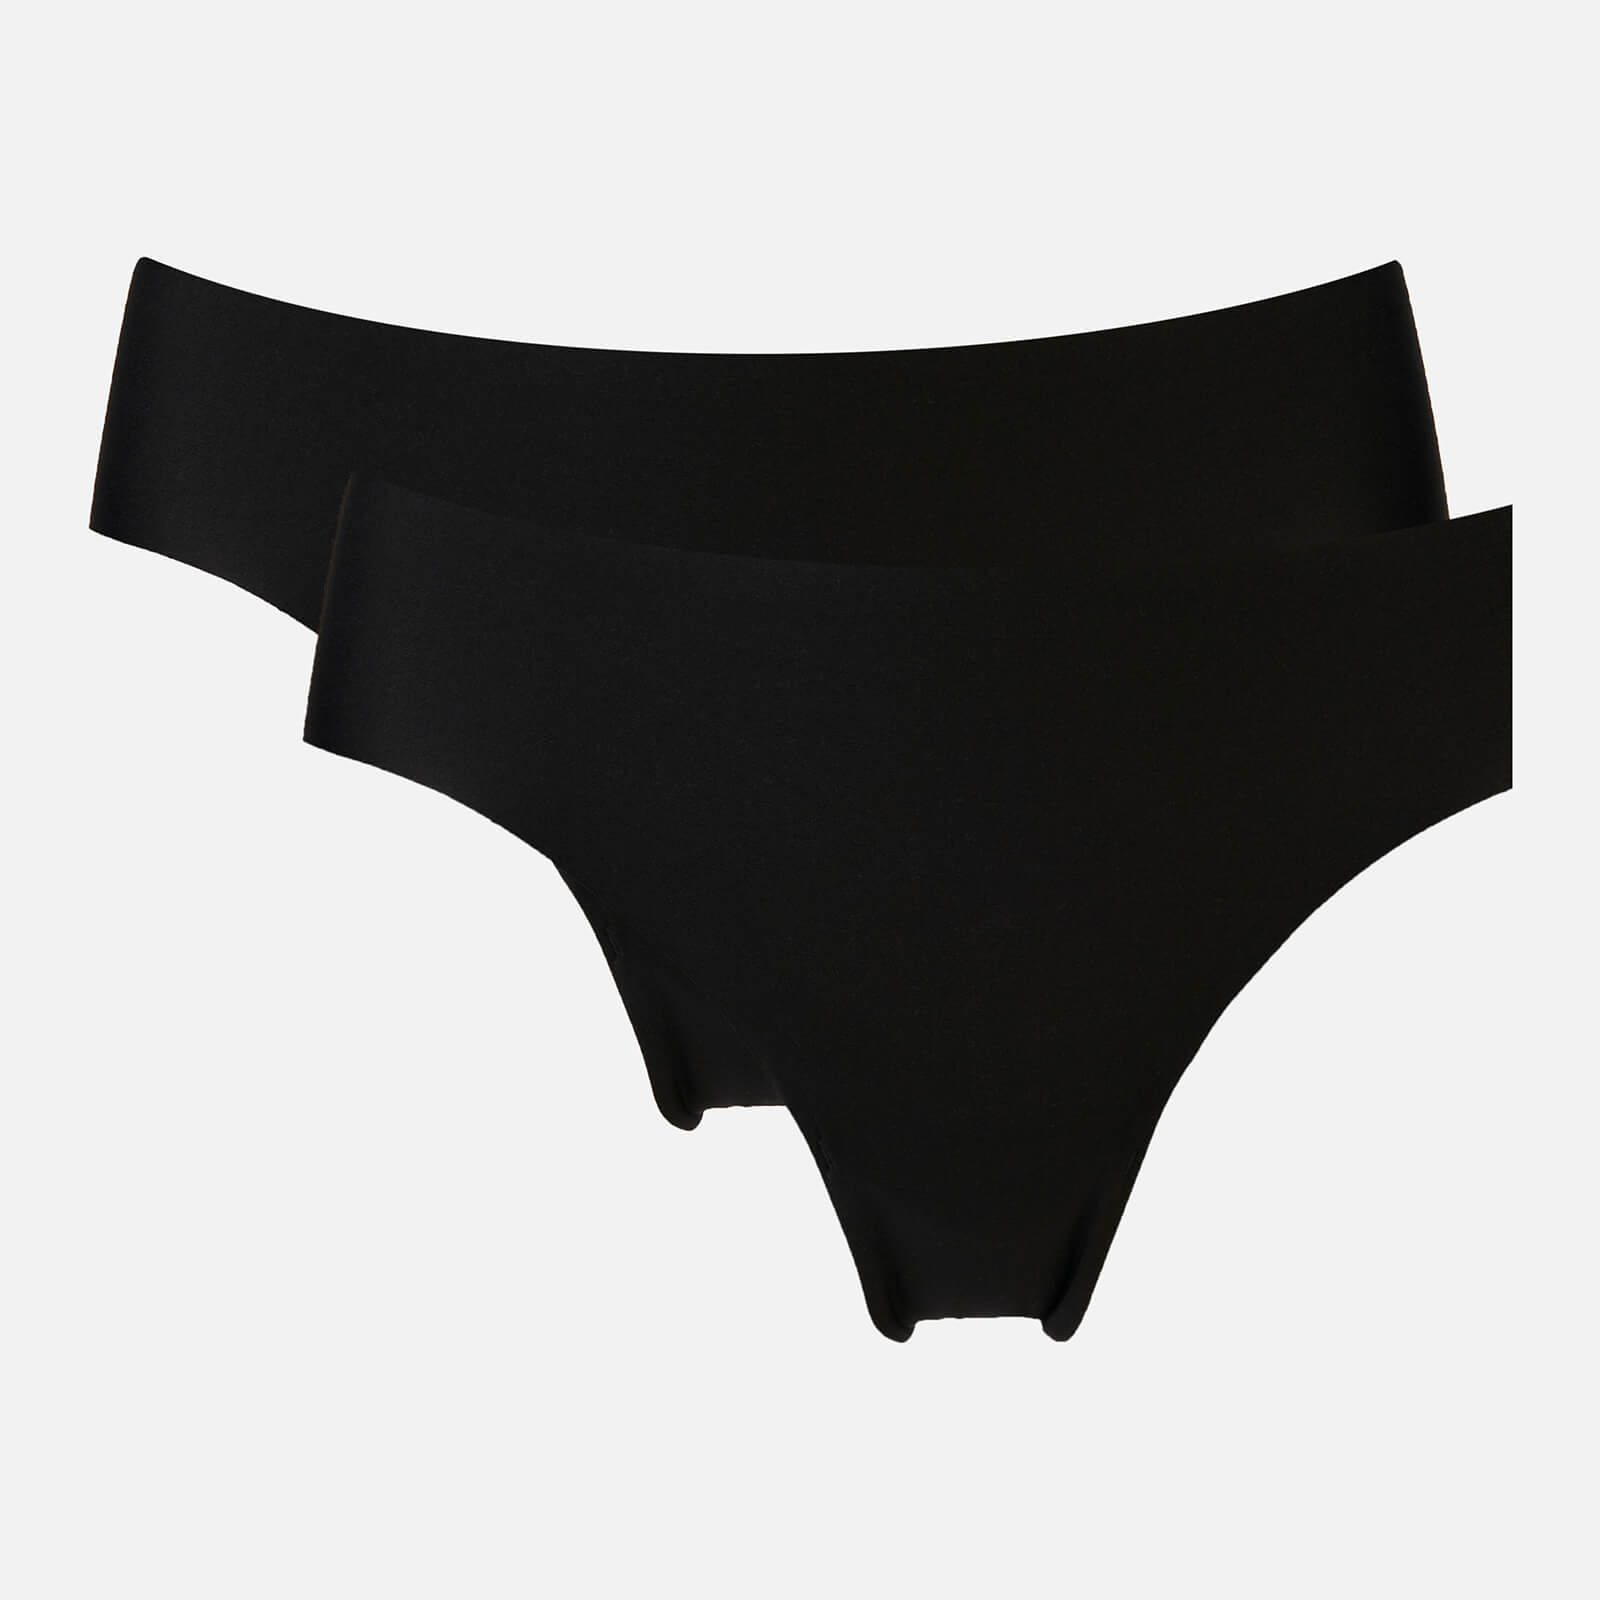 Organic Basics Women's Invisible Cheeky Briefs 2-Pack - Black - S